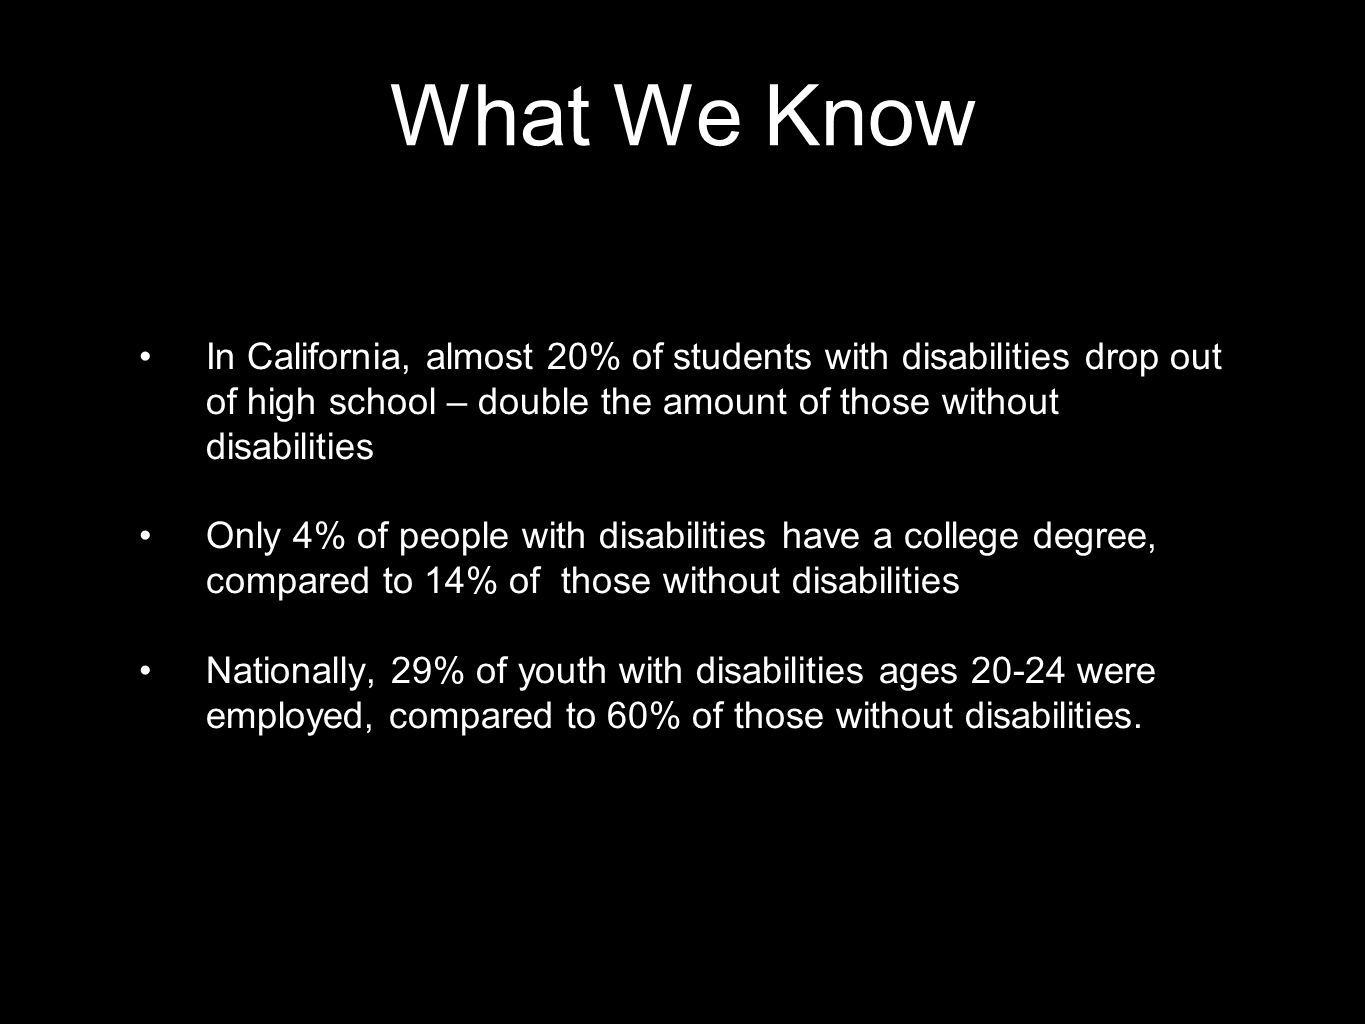 What We Know In California, almost 20% of students with disabilities drop out of high school – double the amount of those without disabilities.